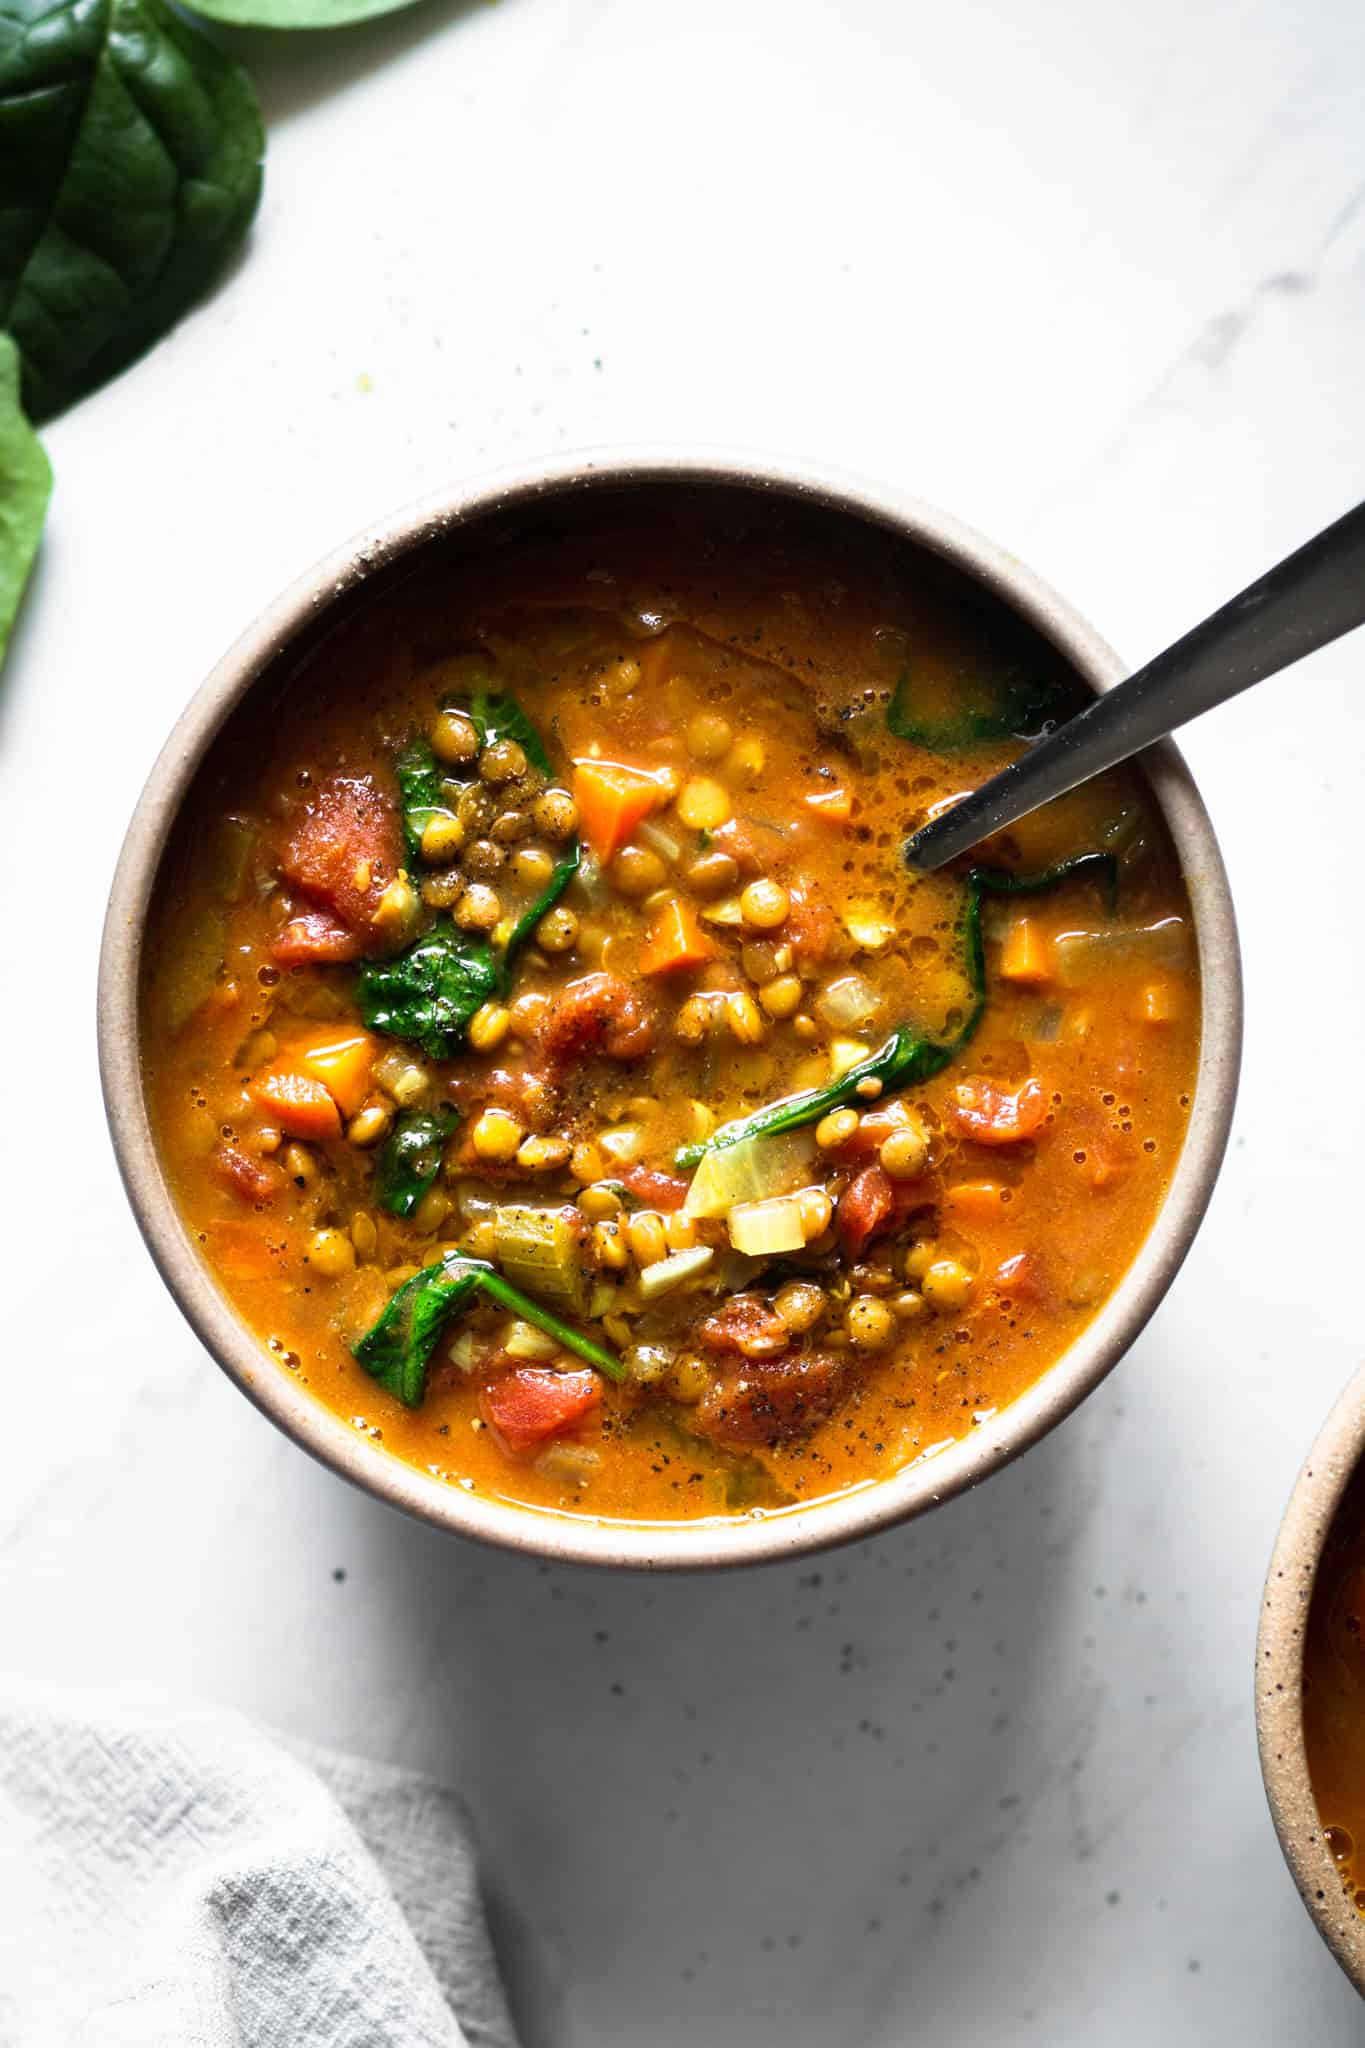 lentil soup - 132 vegan recipes to start the new year